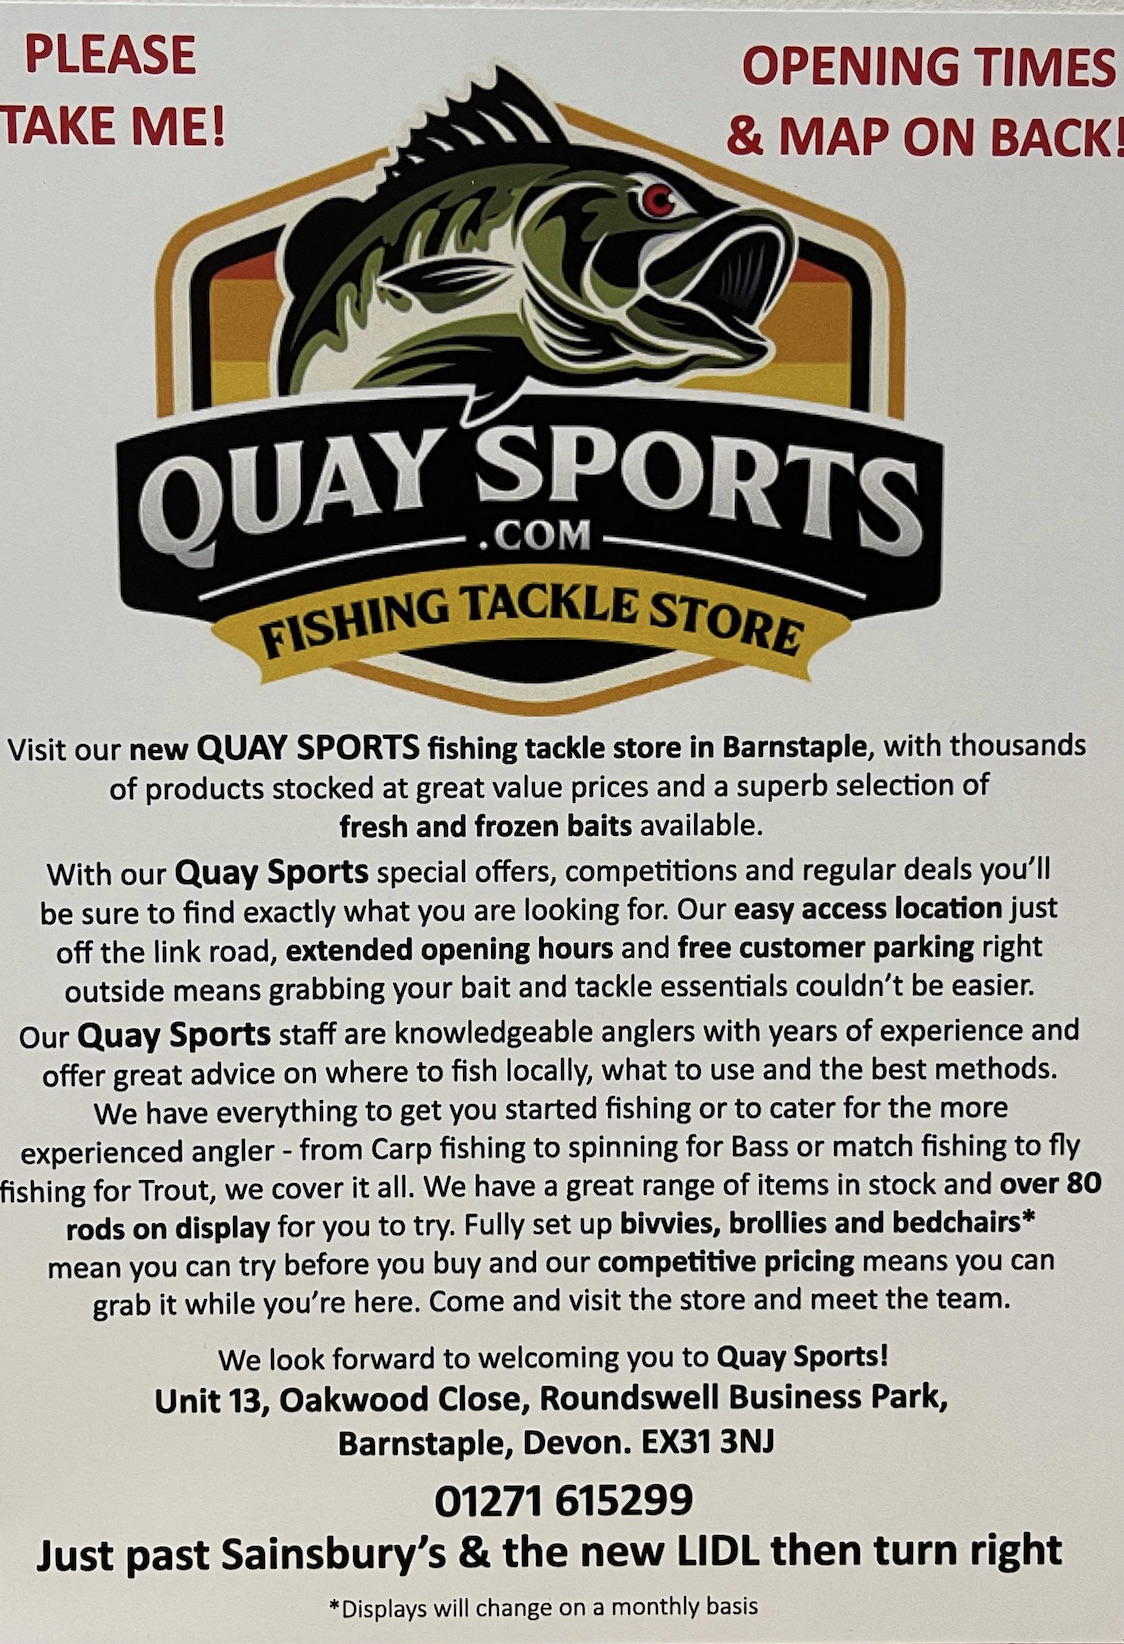 New Fishing Tackle Store for Barnstaple - Quay Sports - North